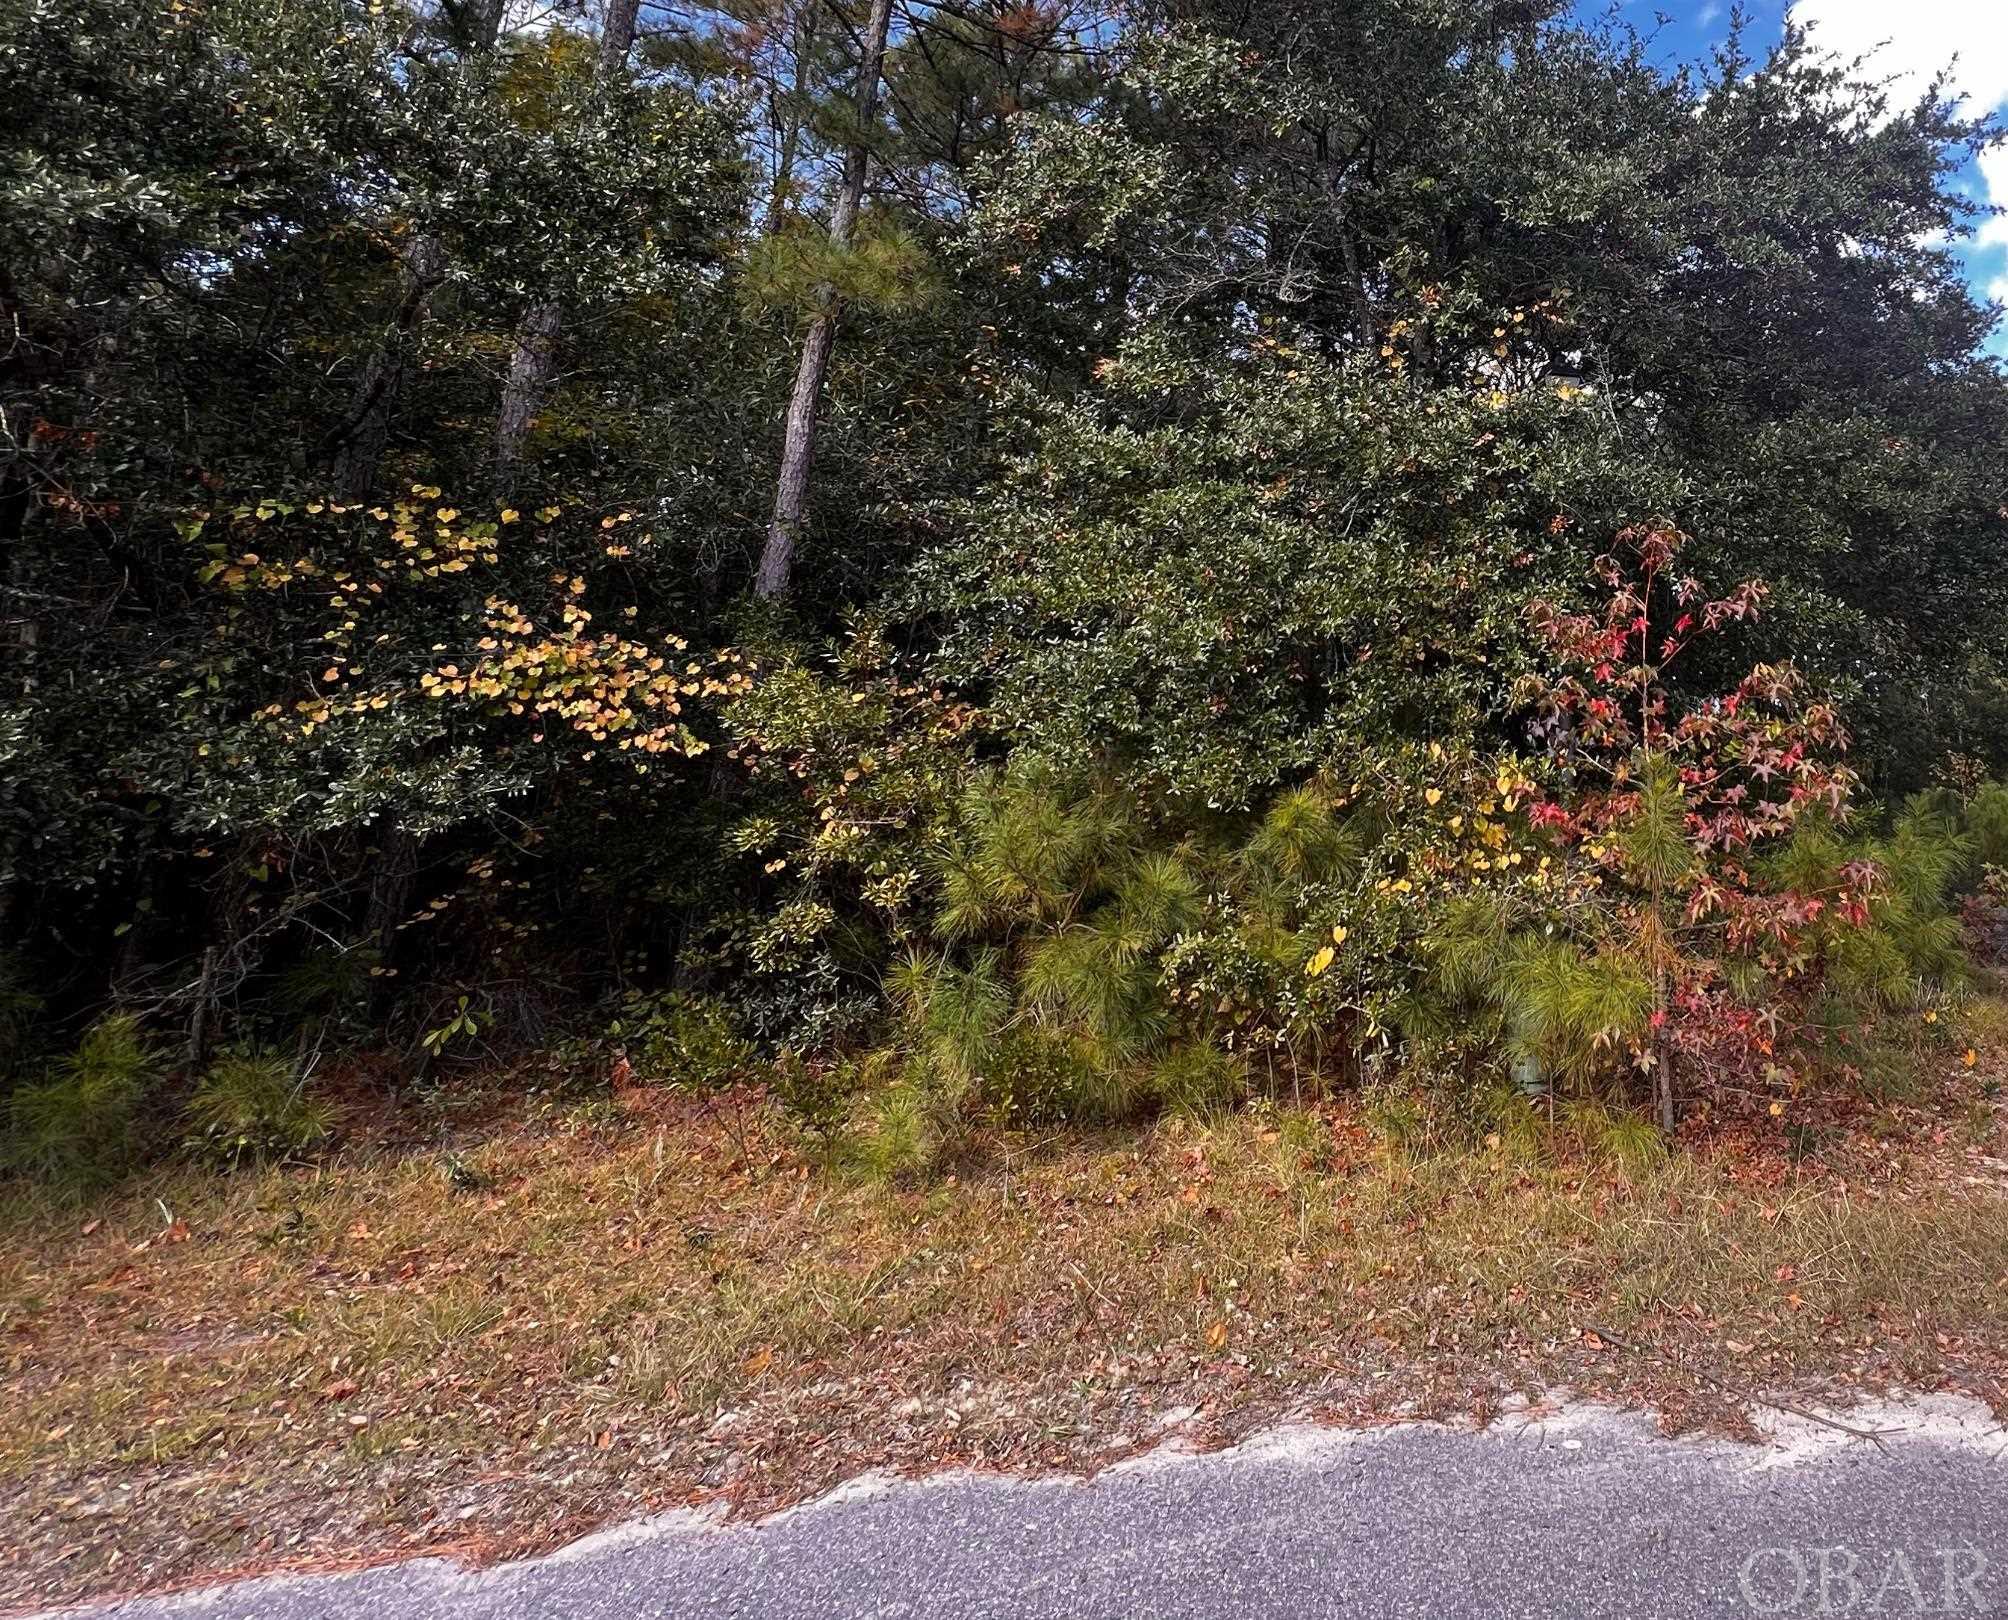 Wonderful opportunity to build your dream home in the quiet subdivision of Duke Woods, at the end of a cul-de-sac. Only five minutes to historic downtown Manteo with schools, including College of the Albemarle, all the conveniences of shopping, banking, restaurants and municipal needs. Roanoke Island is home to the Lost Colony along with many other historic sites. Too many amenities mention, there’s the walking/bike path and boat access to some of the best fishing. All this and only 10 minutes from Nags Head.